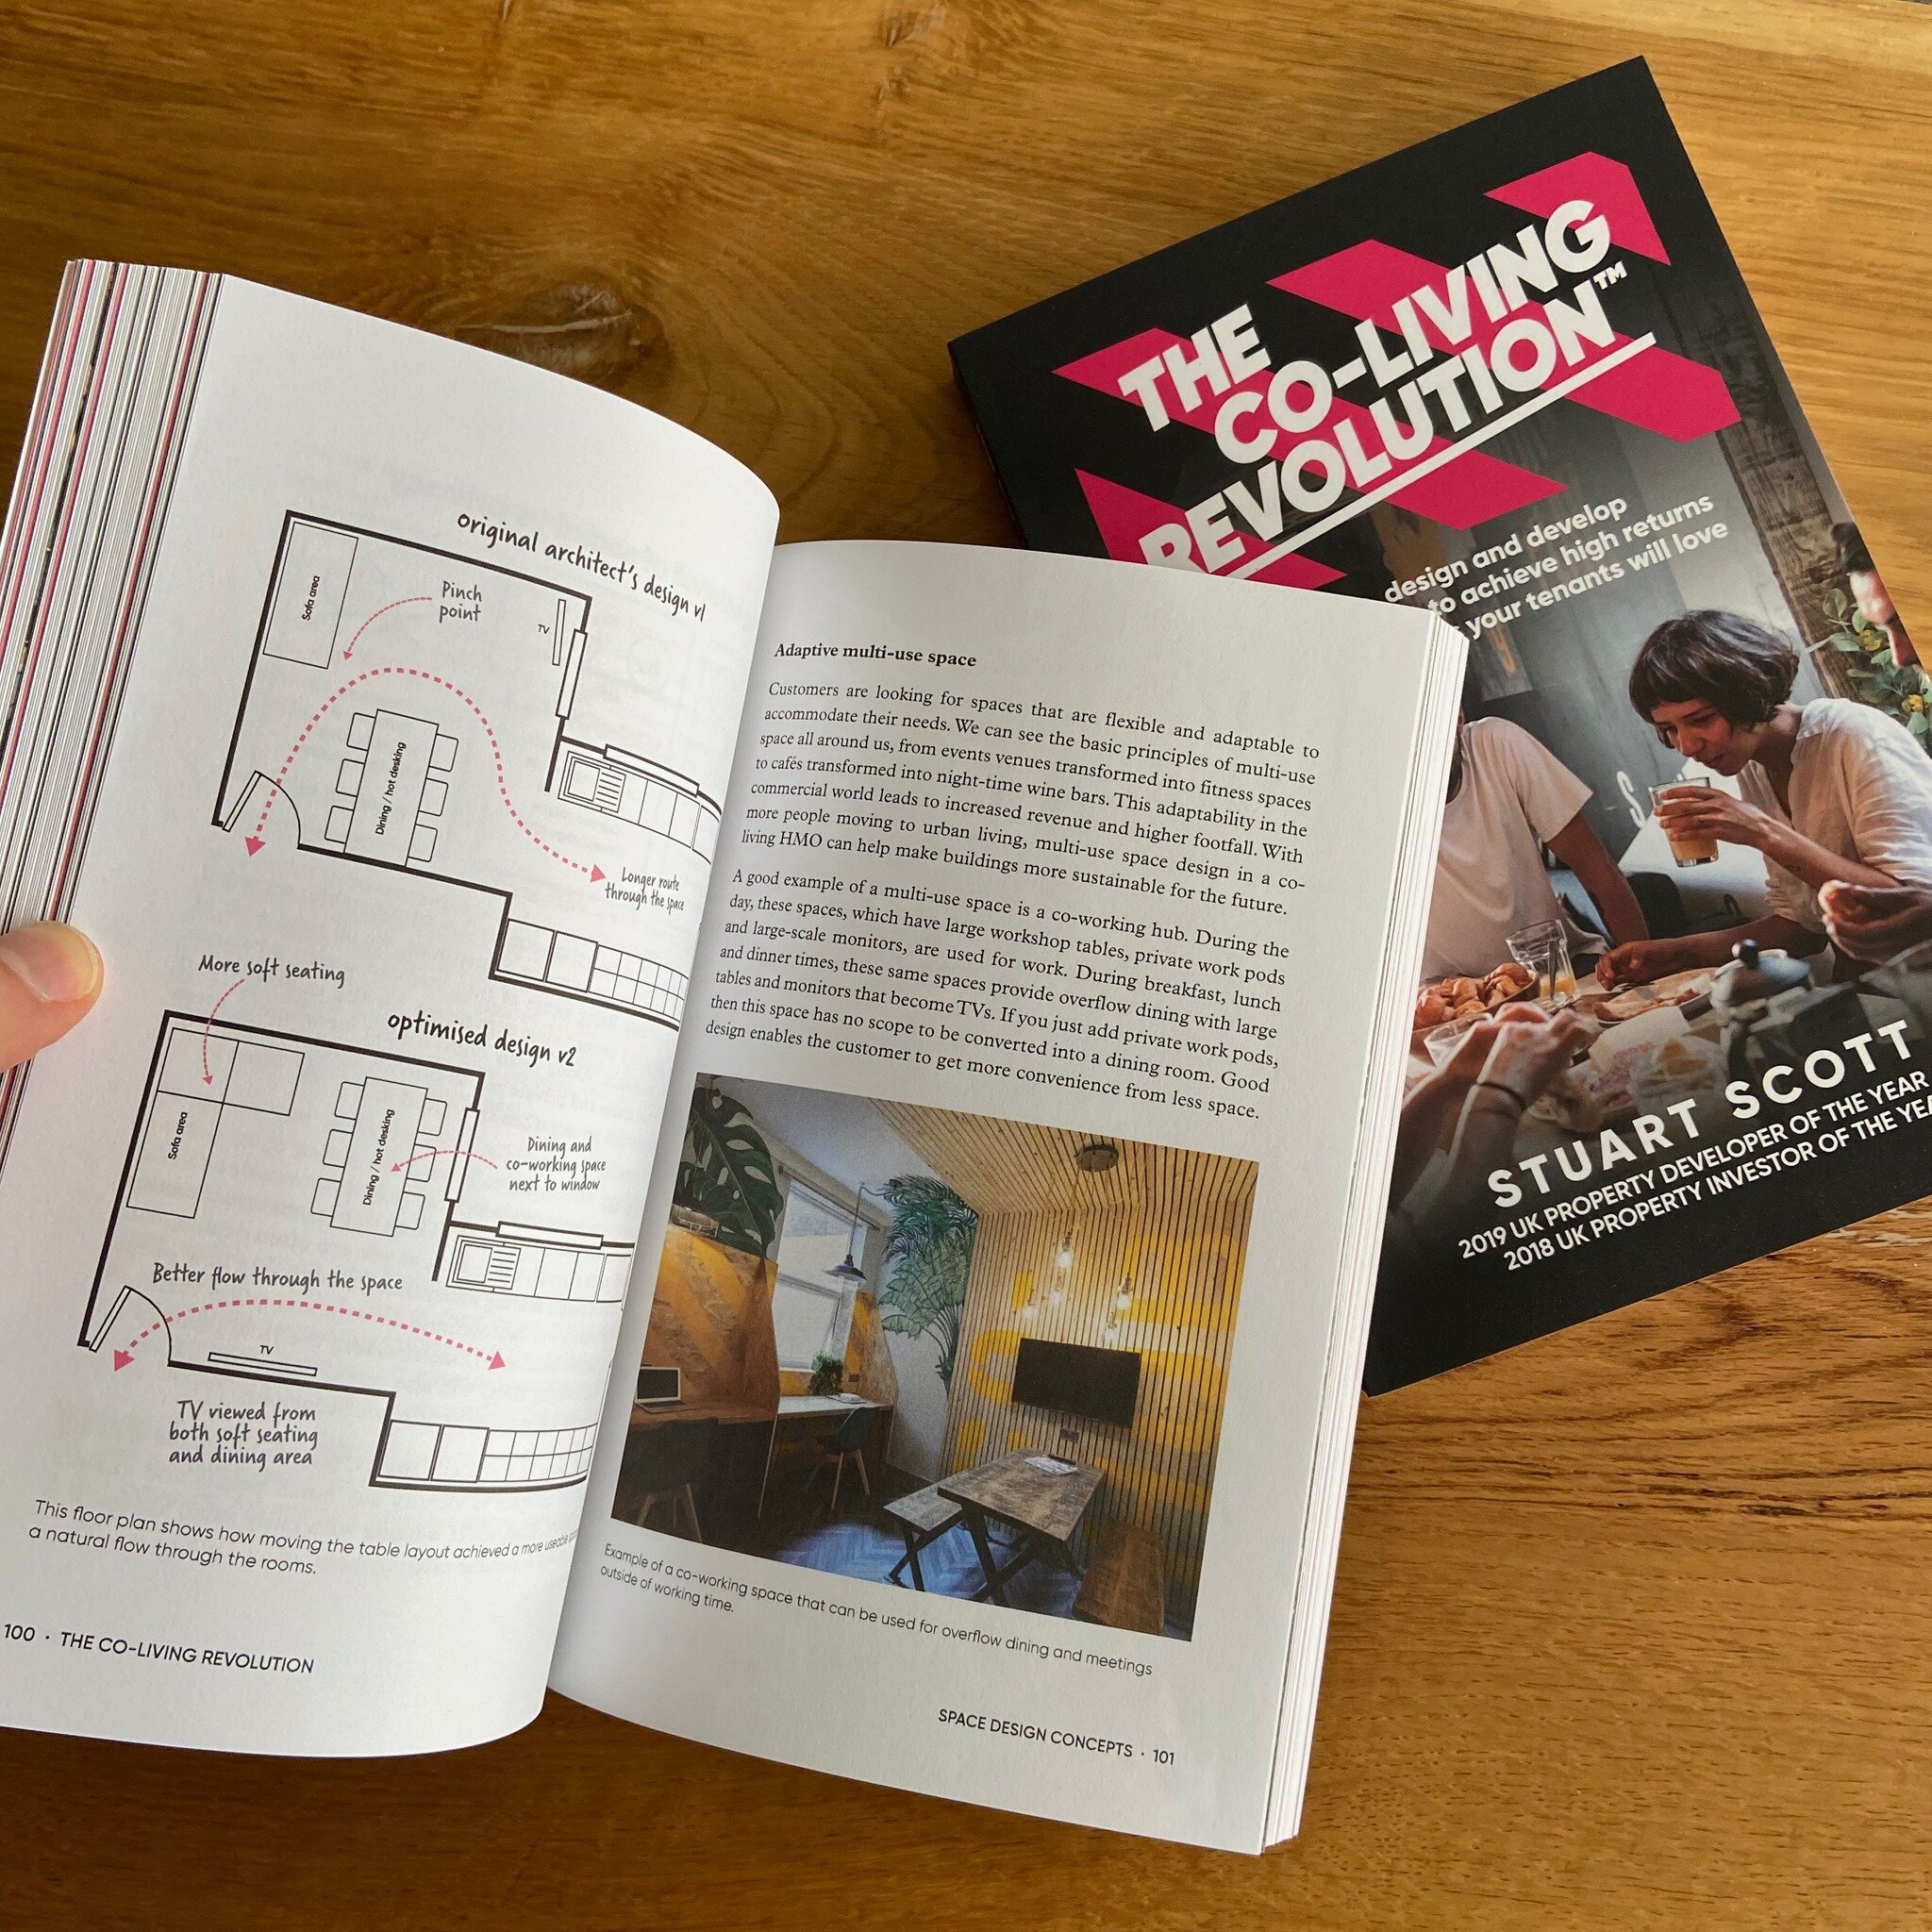 Grab a copy of The Co-Living Revolution book and learn how generate high cashflow with a Co-Living HMO portfolio.

This is a full colour book with over 100 colour images and diagrams to help inspire you on your HMO property journey. 

www.stuart-scot